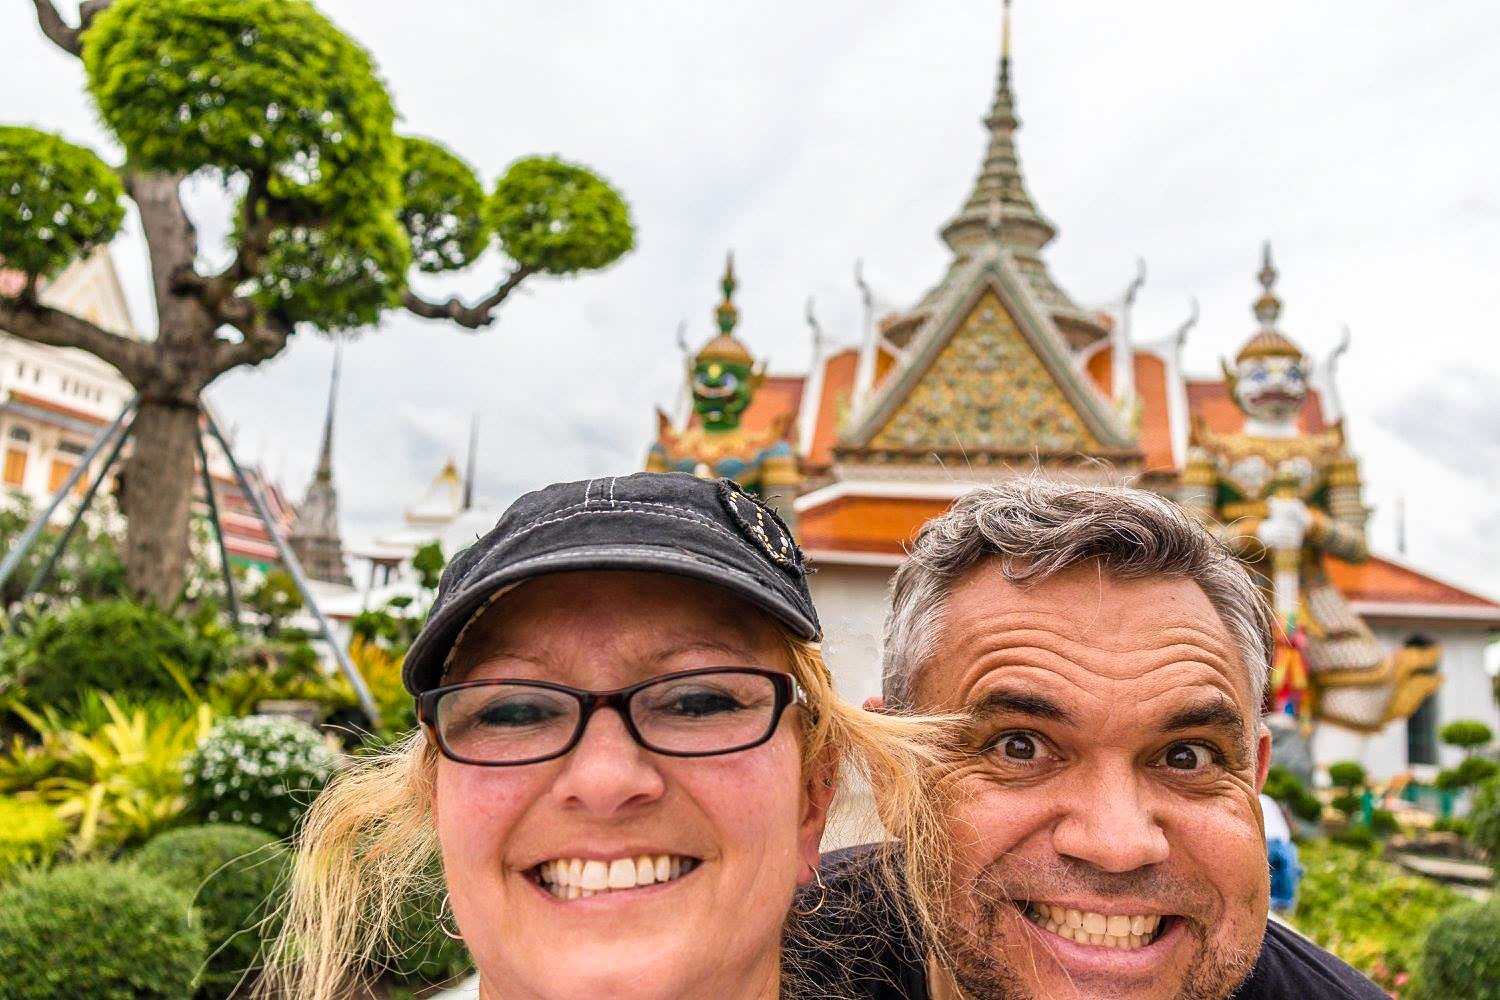 Sheila with her husband, Evo Terra, in Thailand, where they now work.